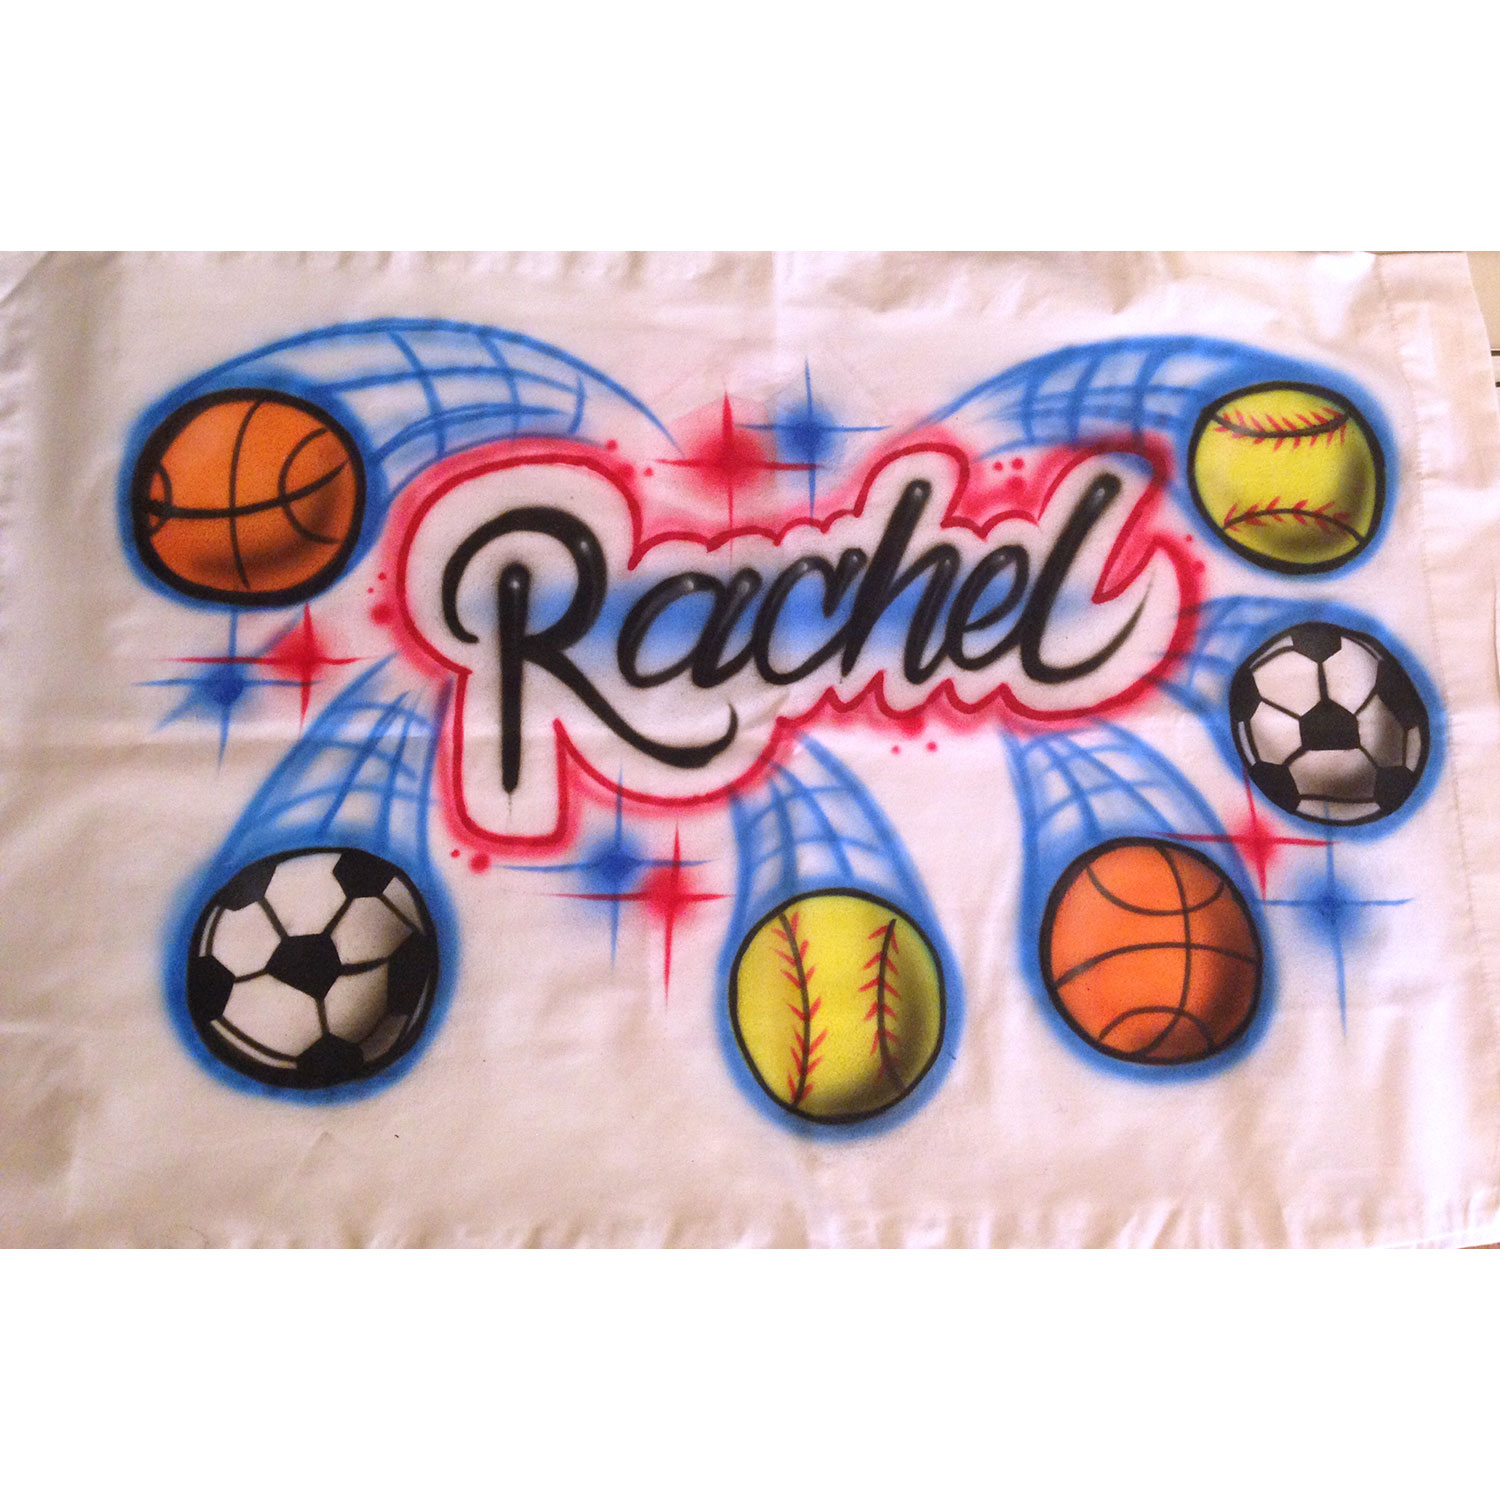 Personalized pillow case with Mutlitple sport designs